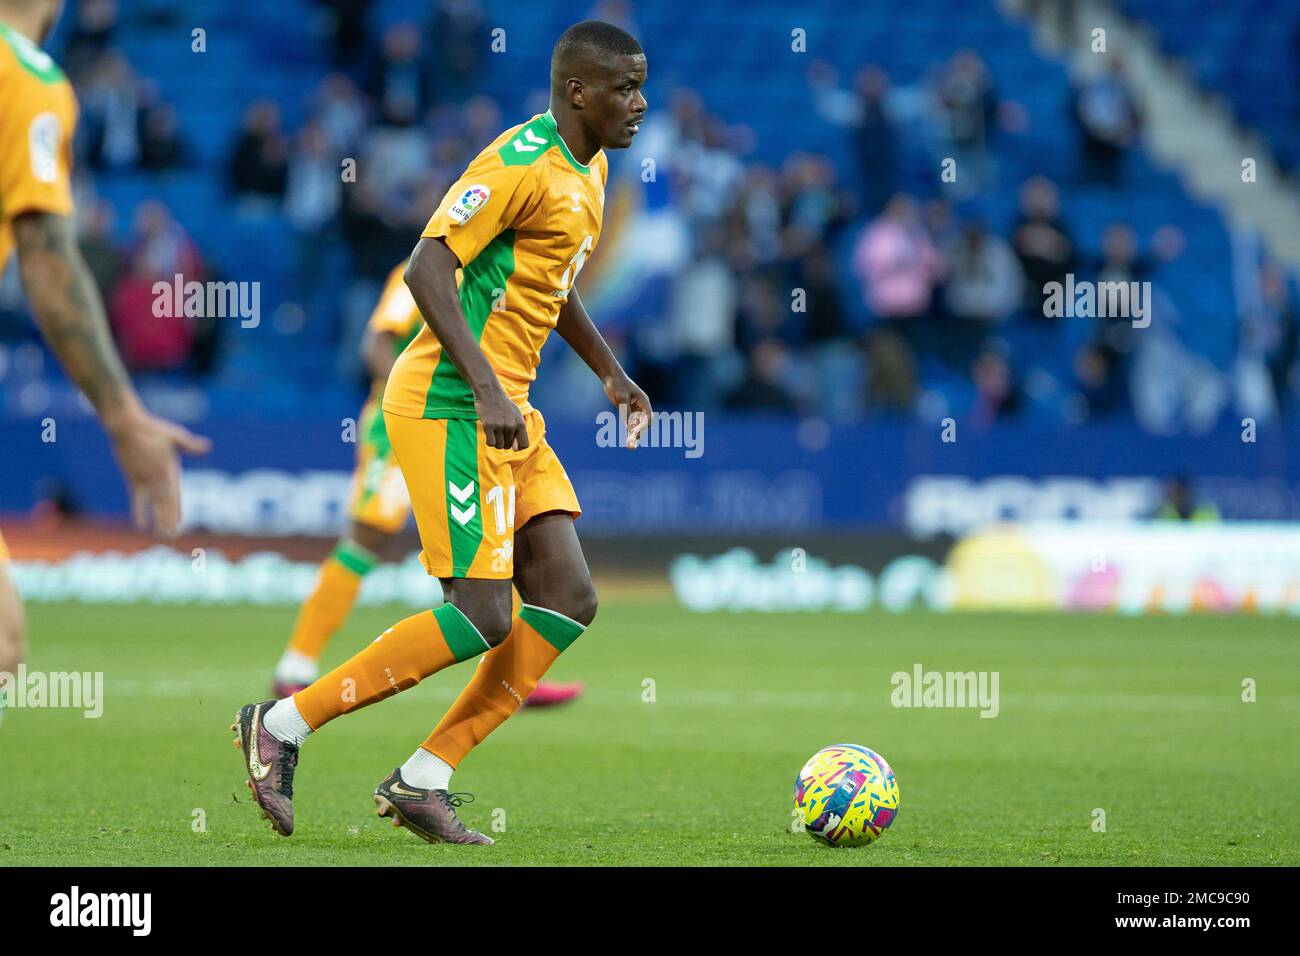 William Carvalho of Real Betis Balompie during the Liga match between RCD Espanyol and Real Betis at RCDE Stadium in Cornella, Spain. Stock Photo